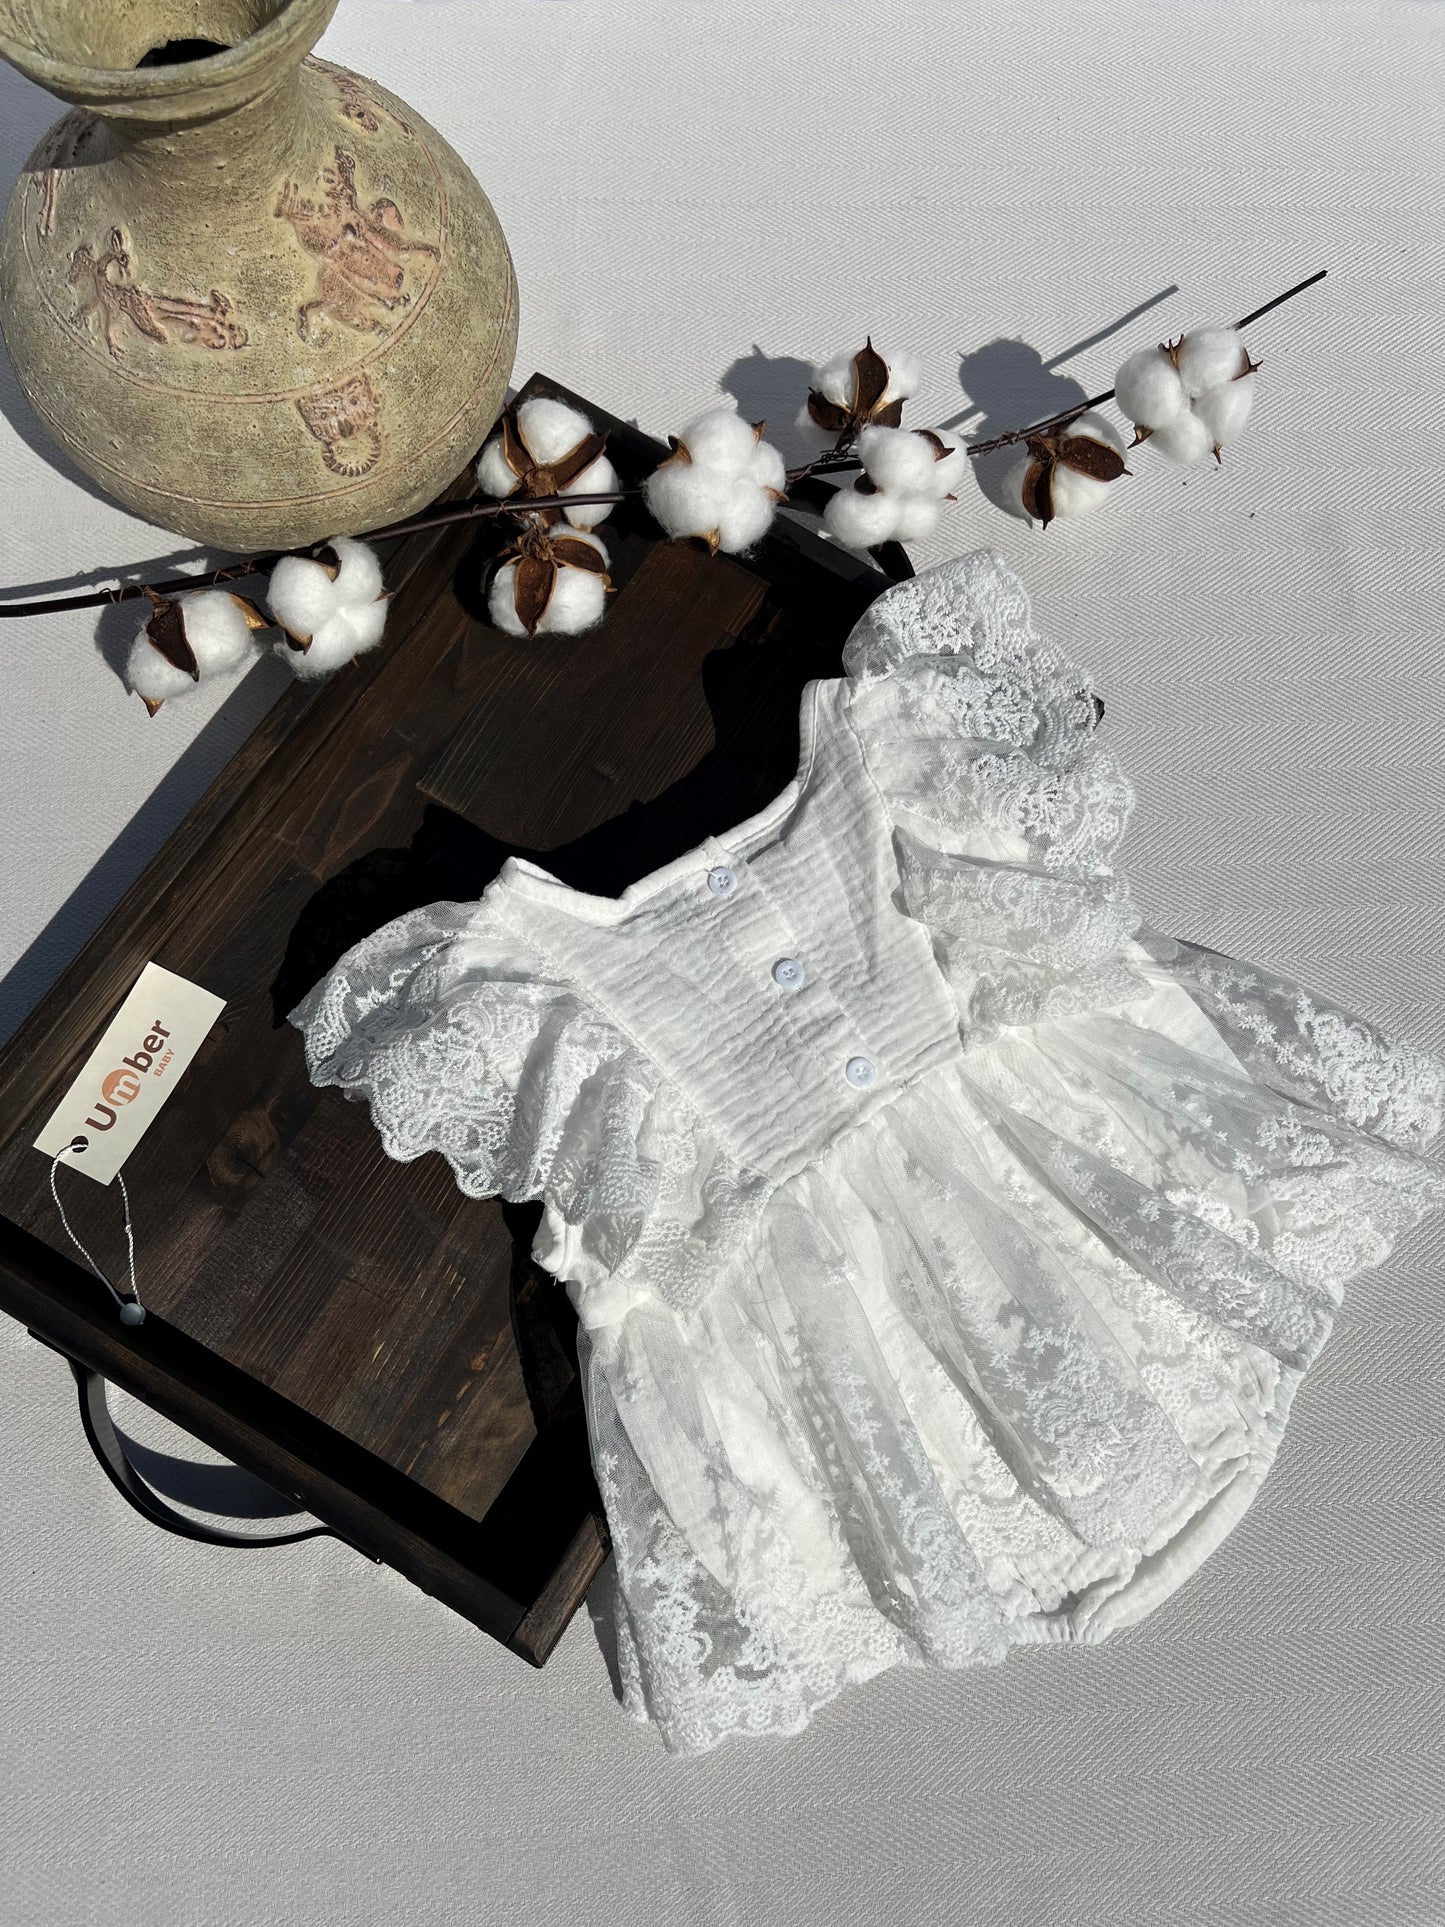 White Lace Ruffle Sleeve Baby Dress with Embroidered Flower Details with Button-up Back